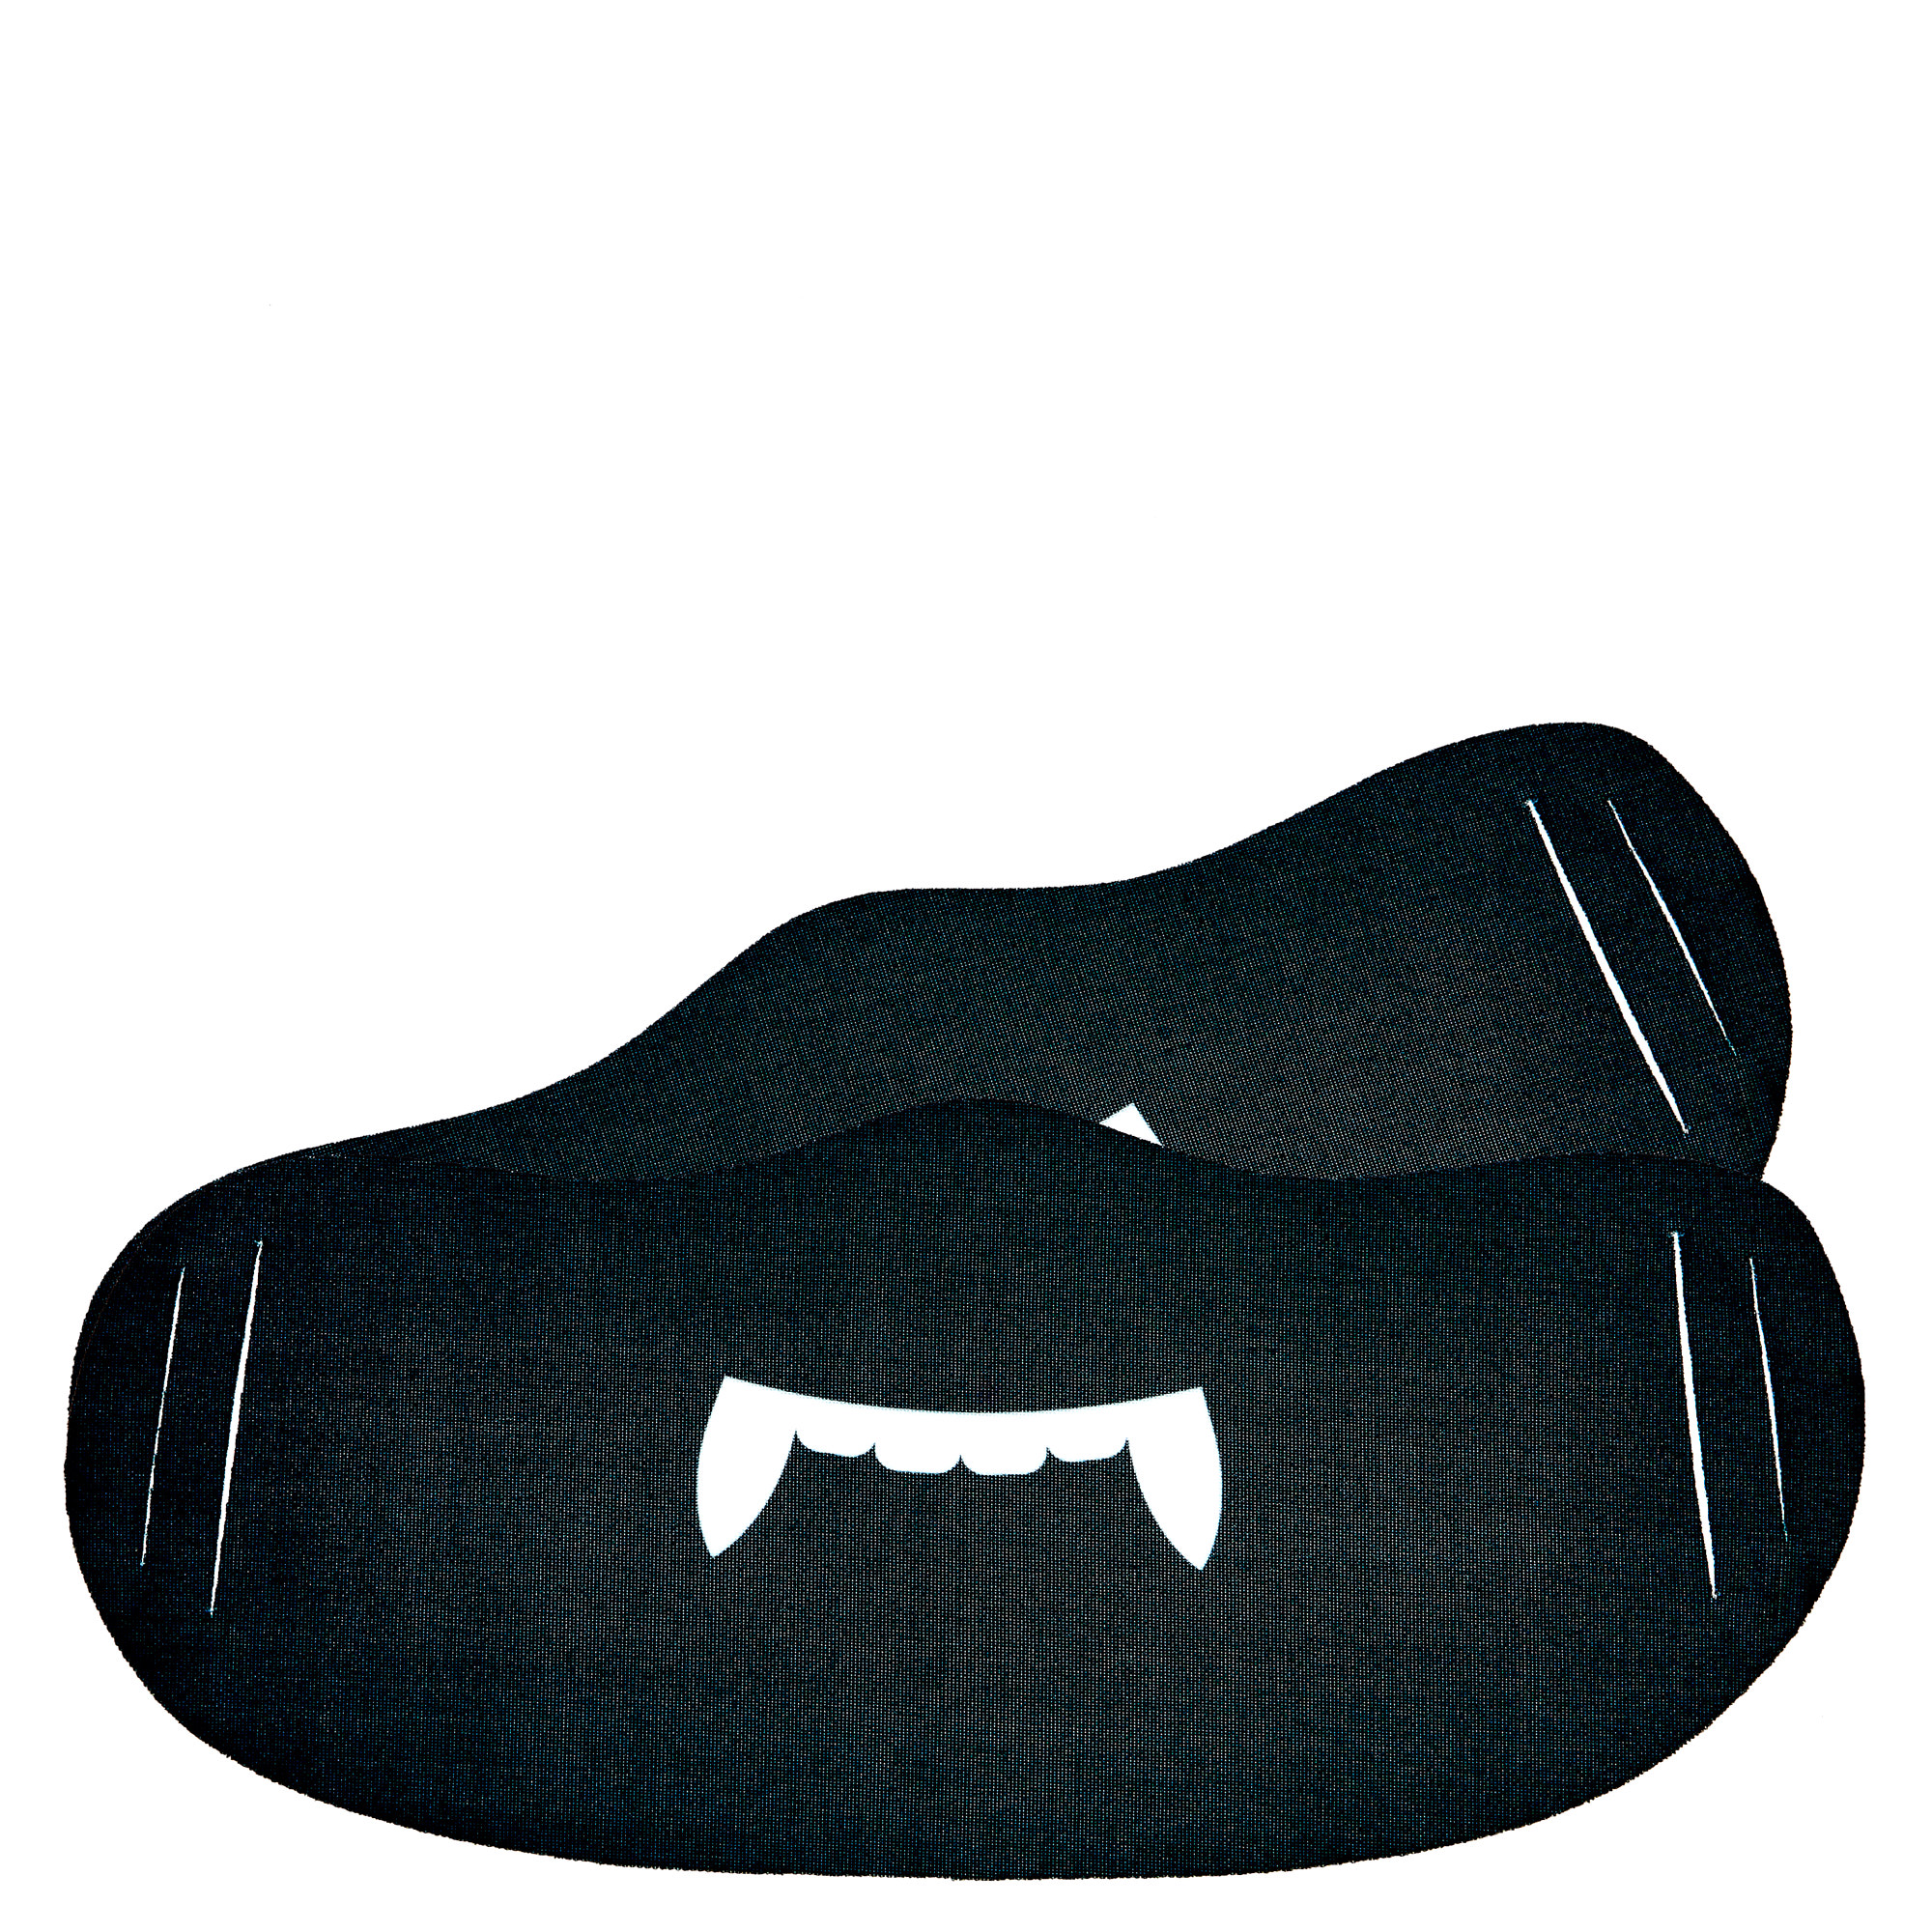 Washable Vampire Fangs Face Coverings - Pack Of 2 